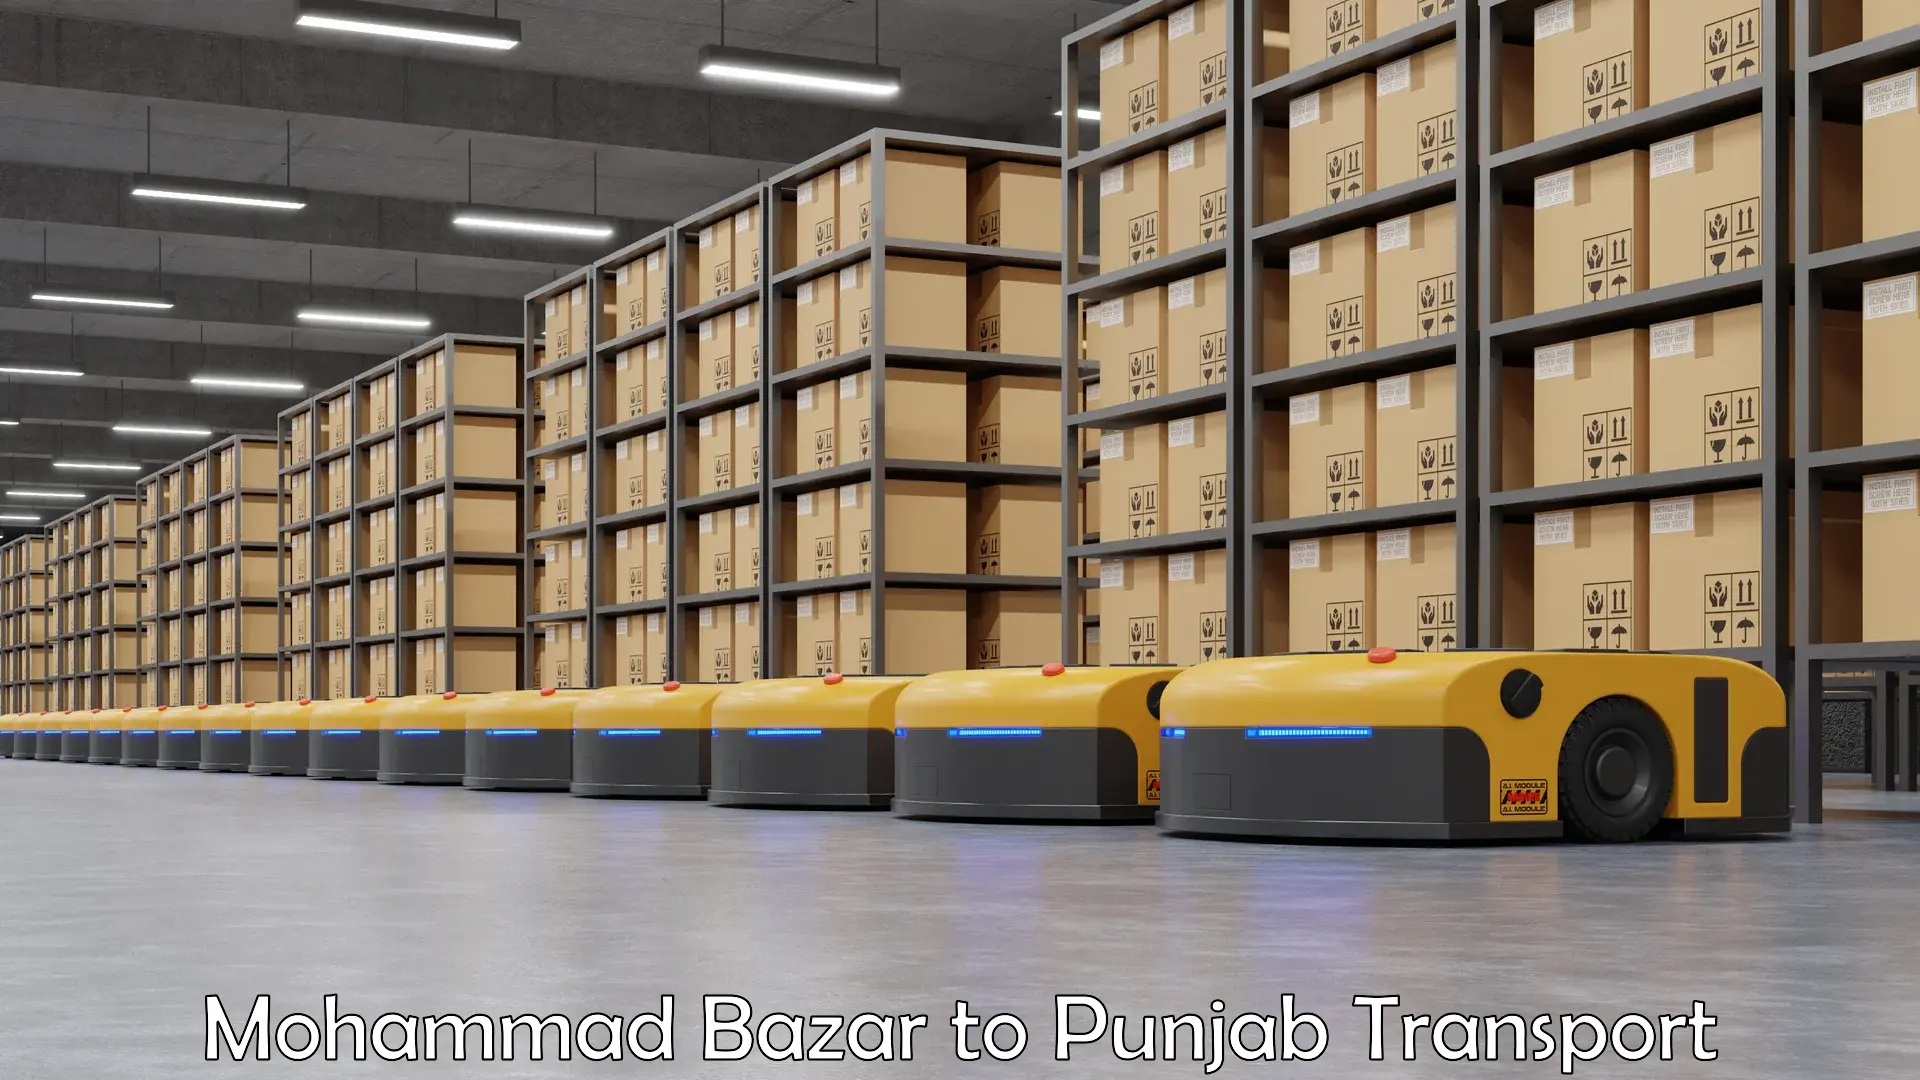 Truck transport companies in India Mohammad Bazar to Punjab